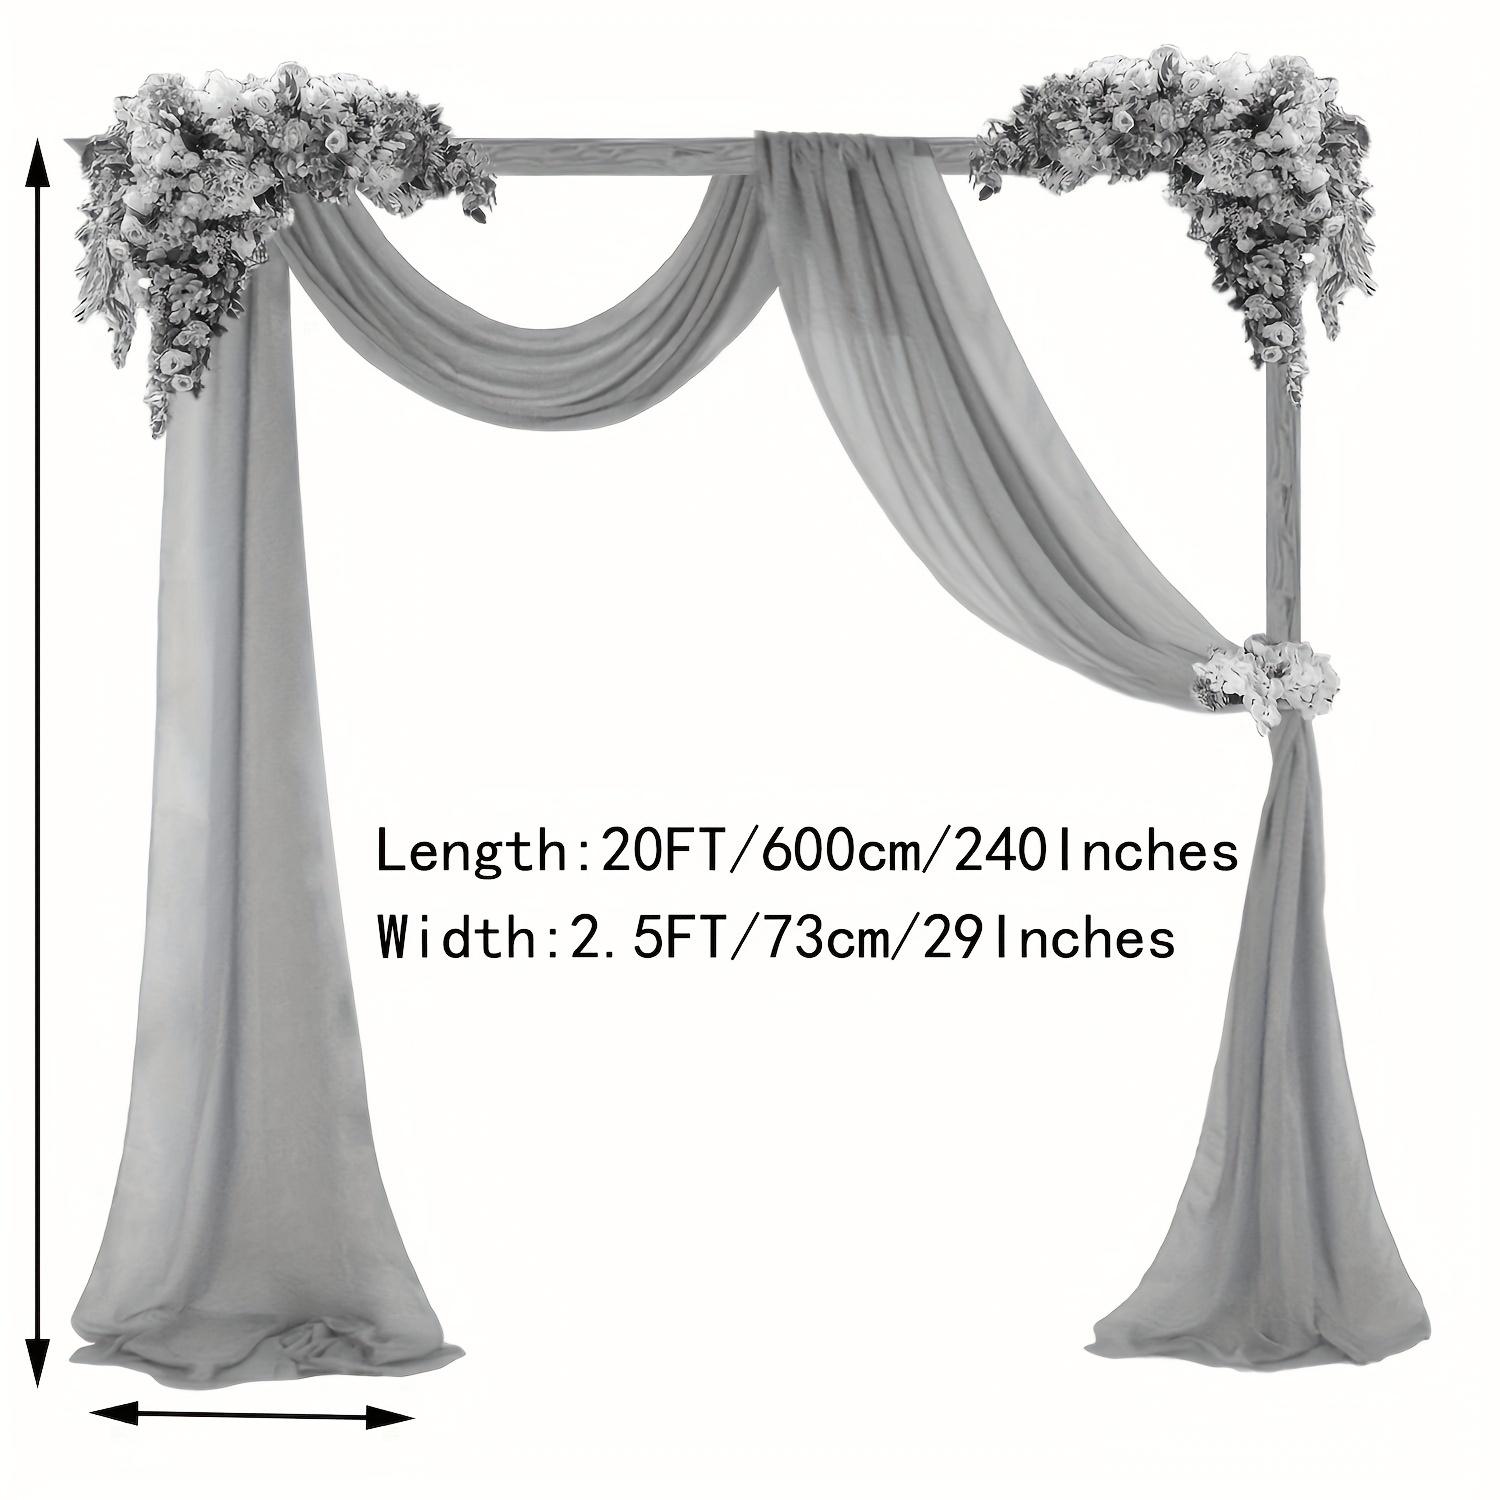  Pardecor Chiffon Wedding Arch Draping Fabric 2 Panles 6 Yard  Purpl Wedding Arches for Ceremony Outdoor 29''x18ft Long Chiffon Drapery  Tulle for Wedding Arch Arbor Wedding Archway Purple : Home 